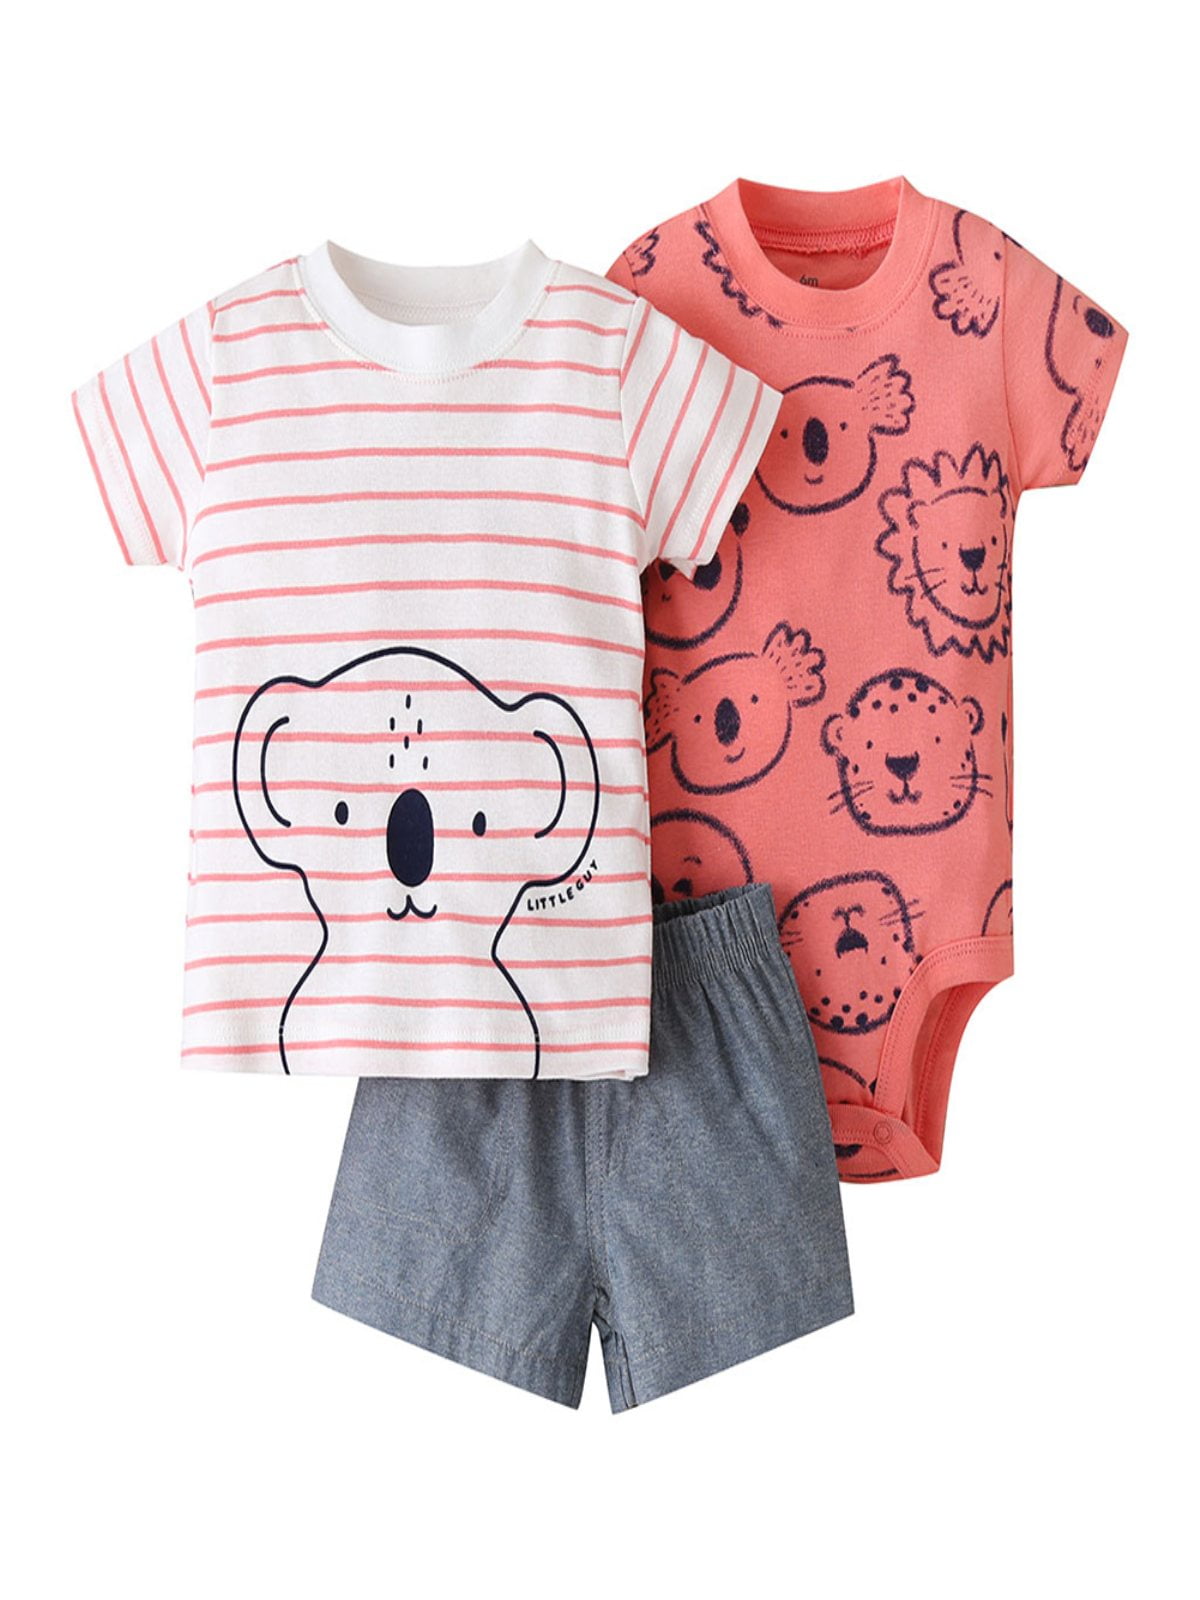 Details about   Summer Baby Boy's Suit Baby Clothing Set for Boys Casual Clothes Set Top Shorts 